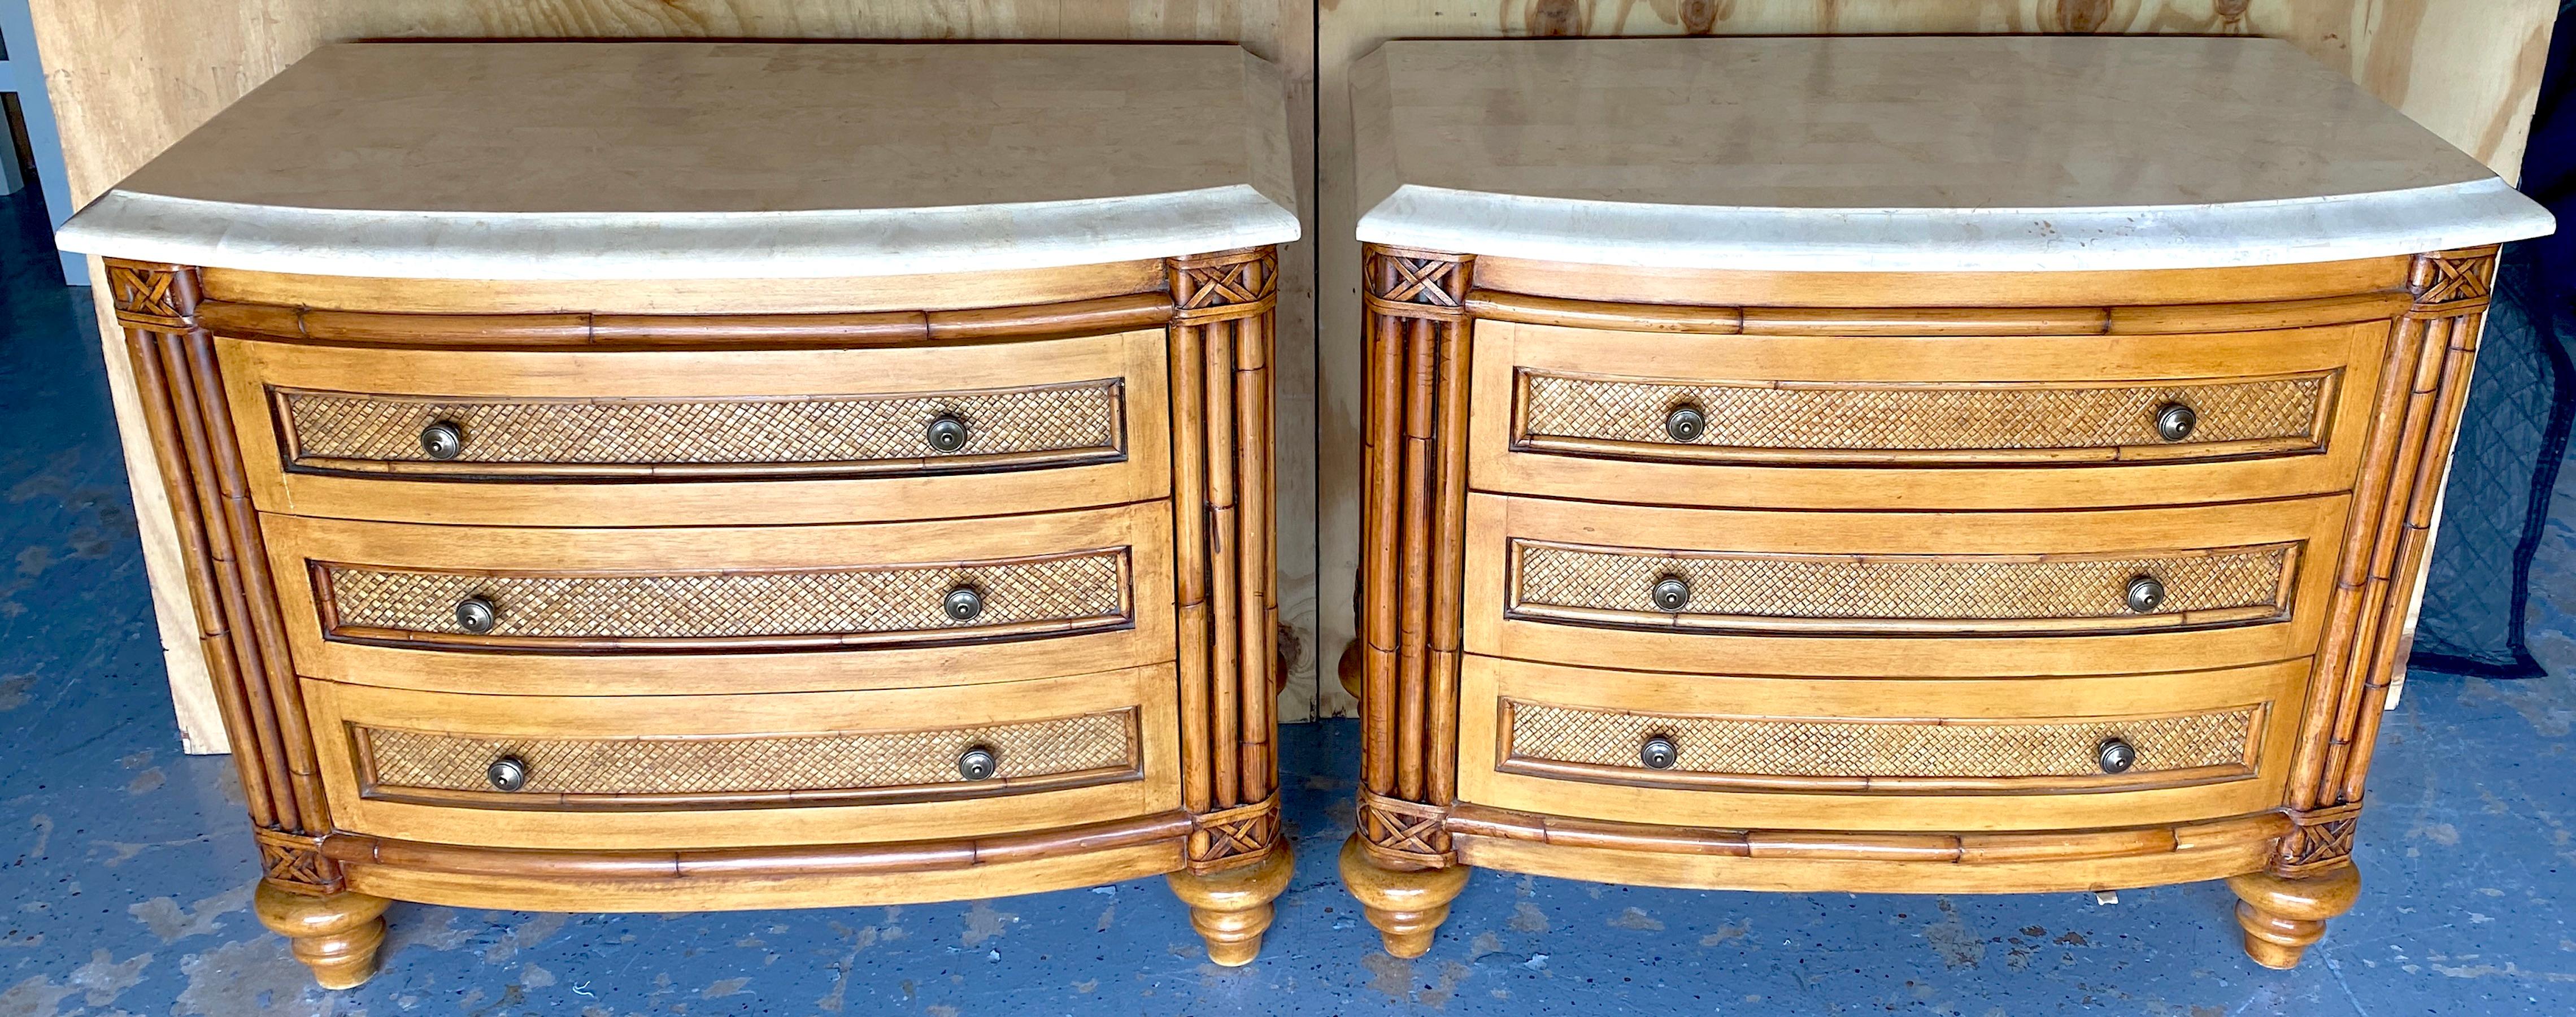 Pair British Colonial Style Bamboo, Rattan, Tessellated StoneChests/Nightstands  In Good Condition For Sale In West Palm Beach, FL